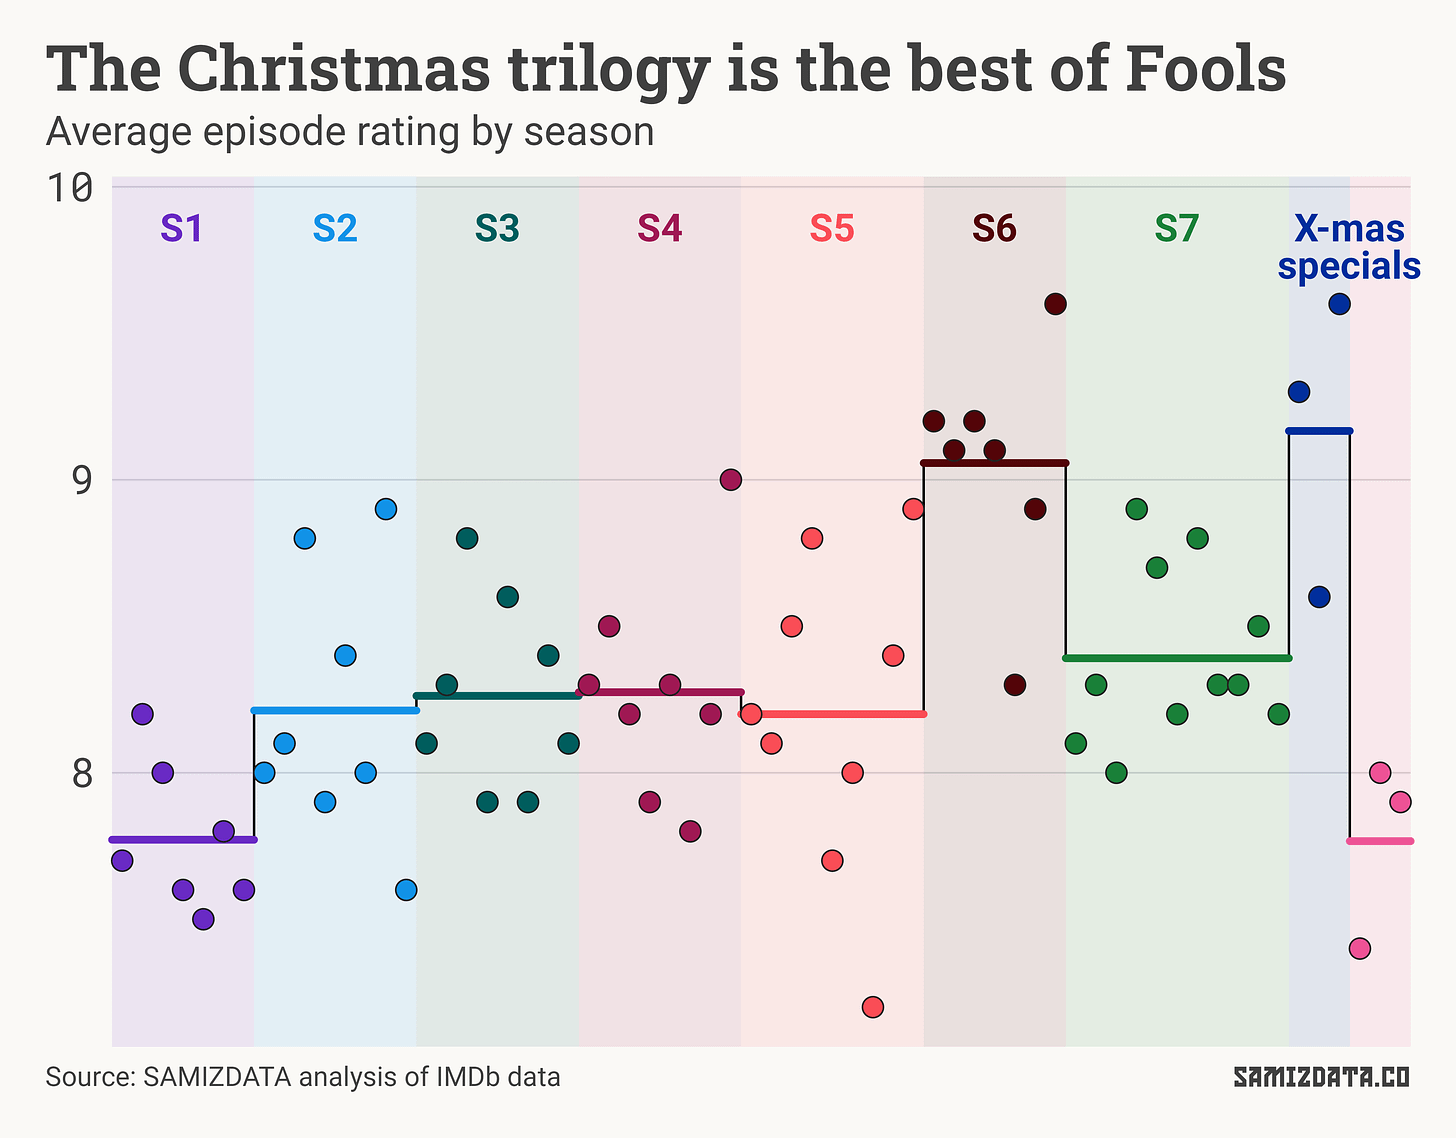 Average rating of Only Fools and Horses by season. The Christmas trilogy is the highest-rated one.